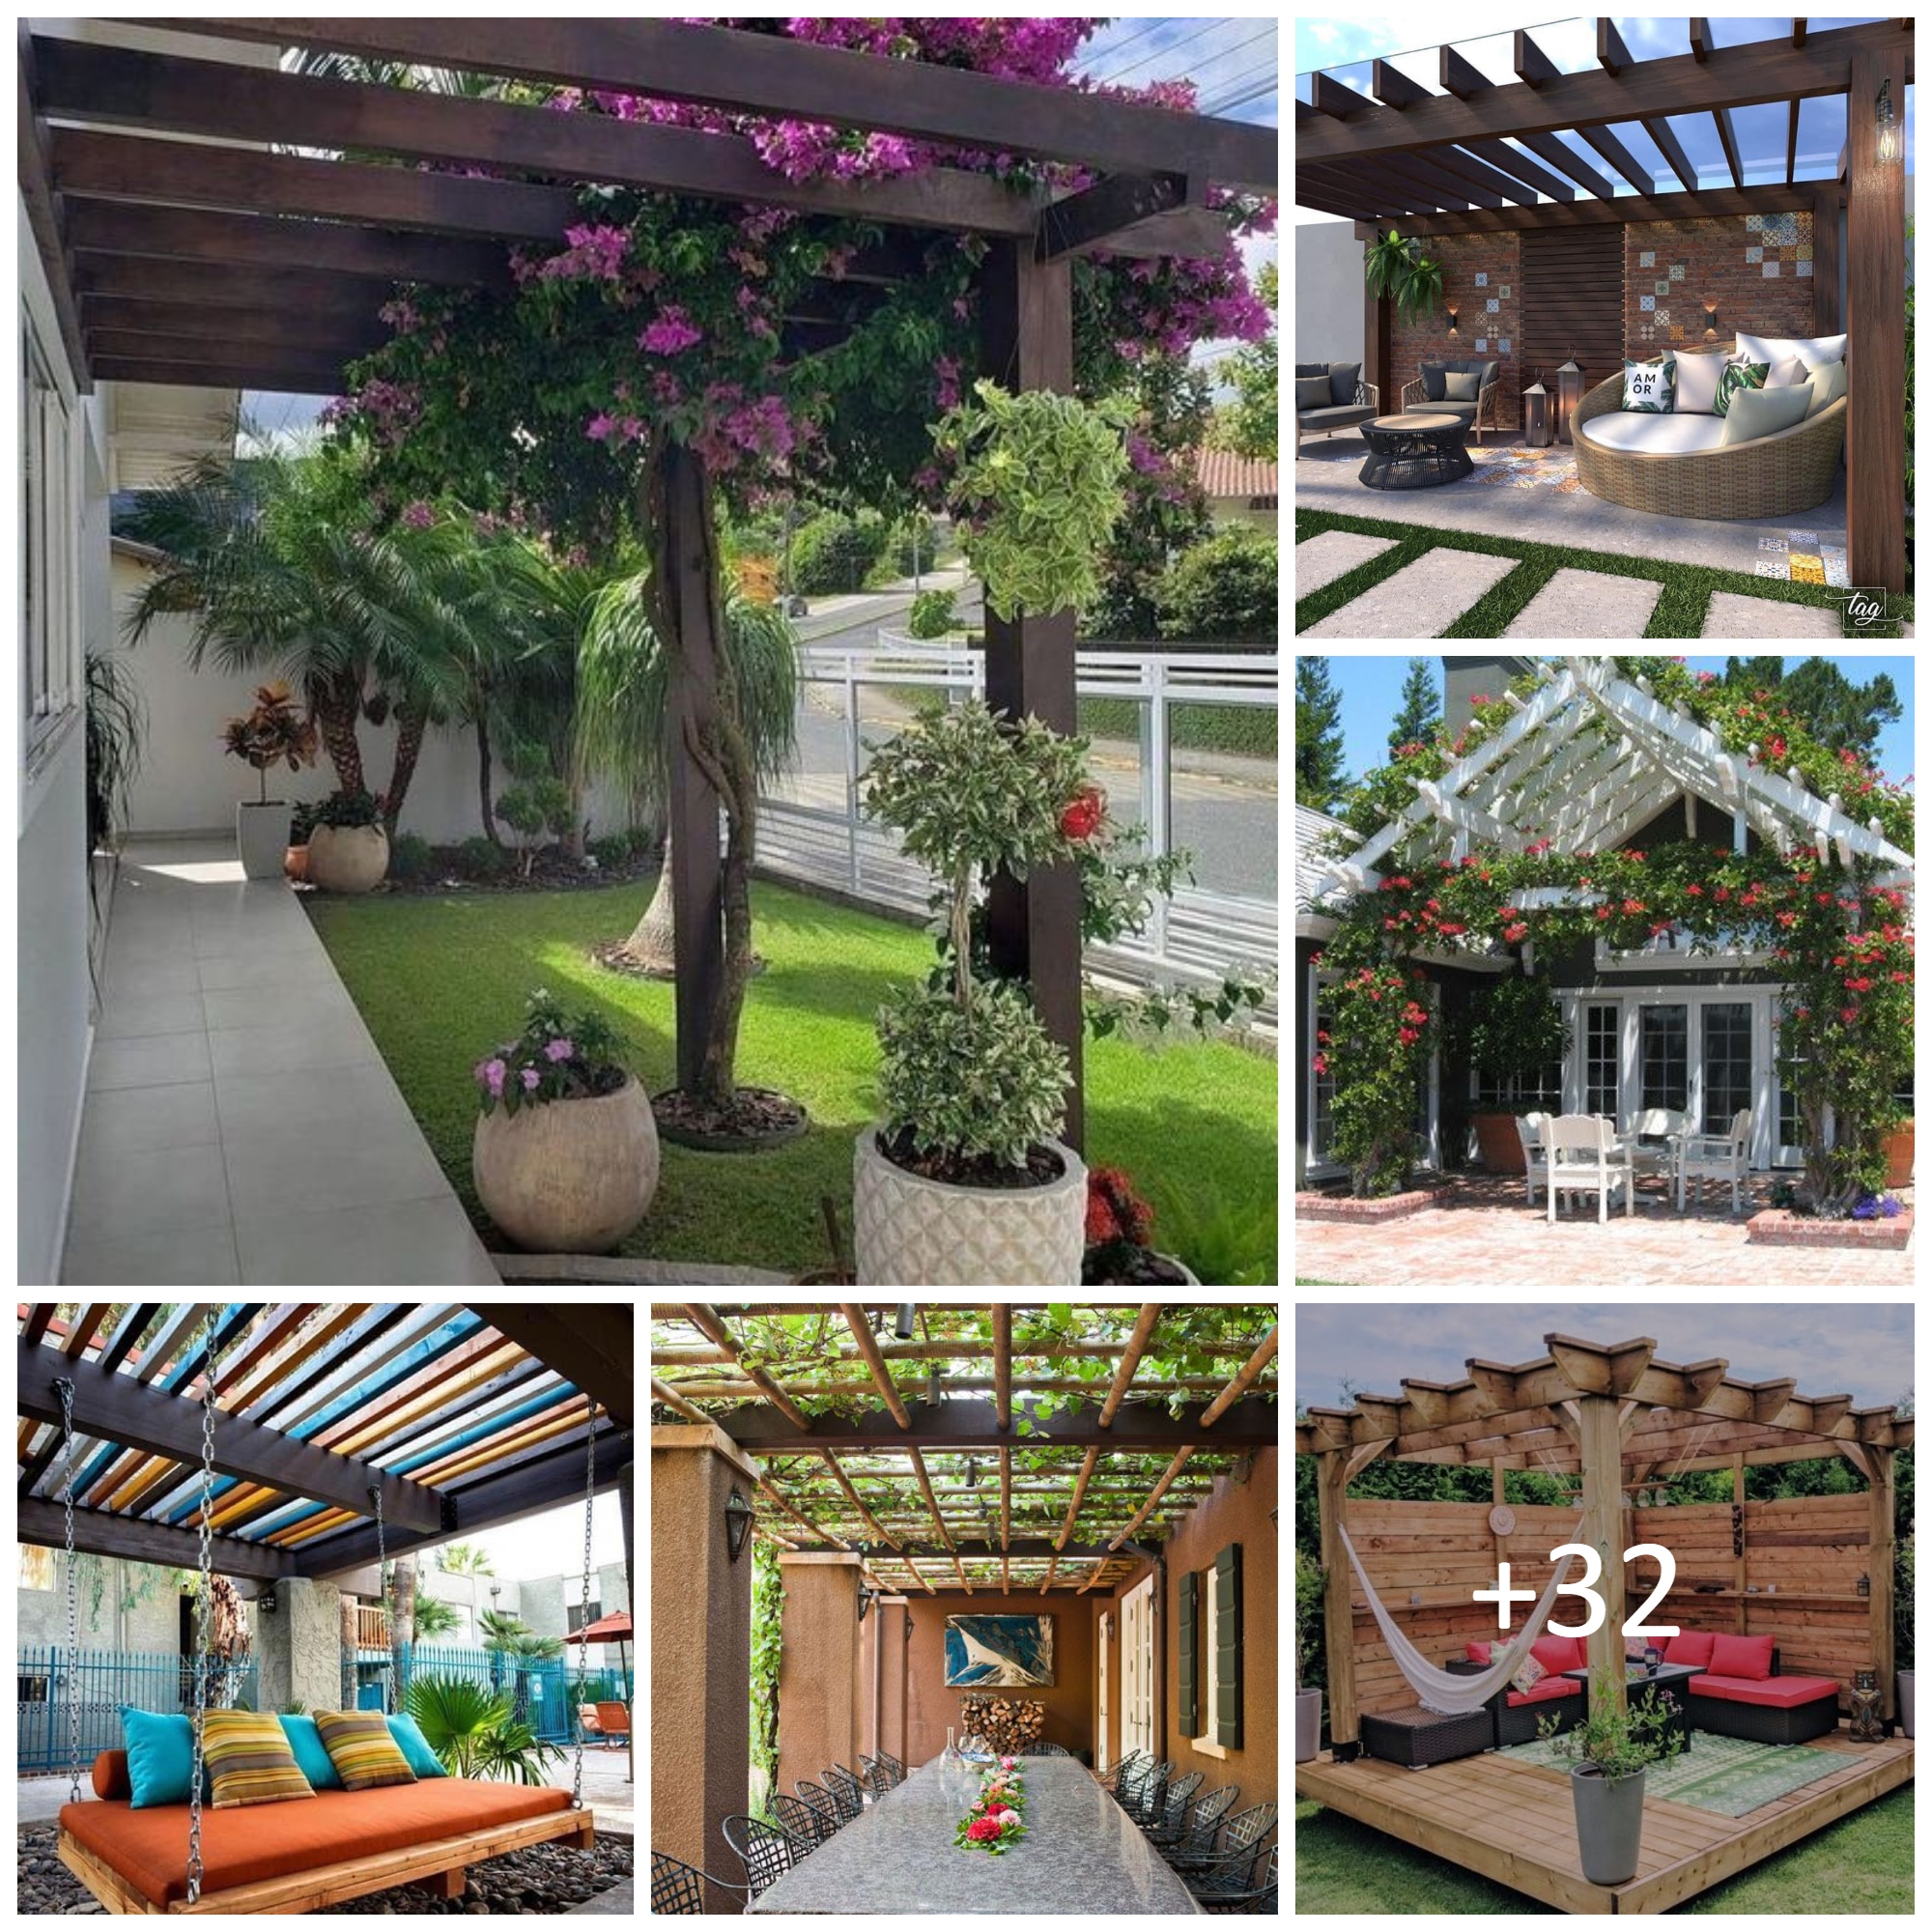 Pergola Ideas That Will Add Style and Shade to Your Backyard